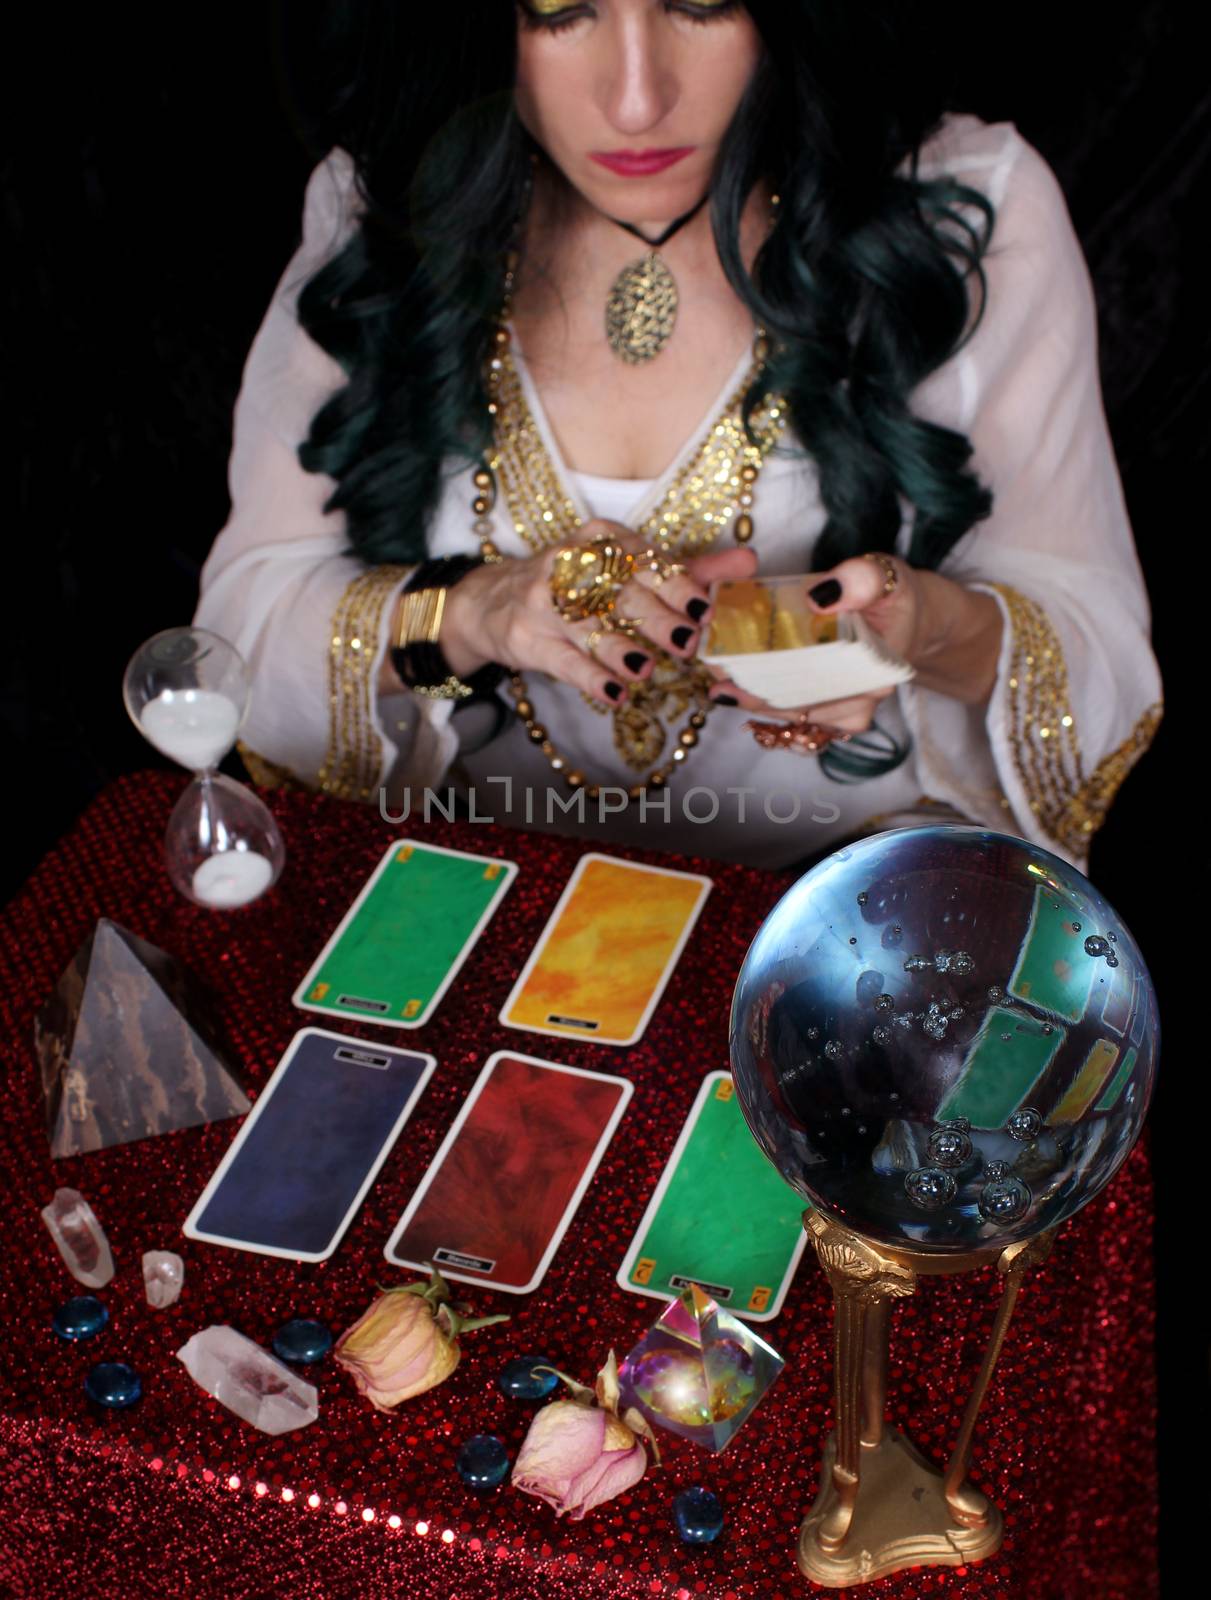 Psychic with Black and Green Hair, crystal ball and tarot cards